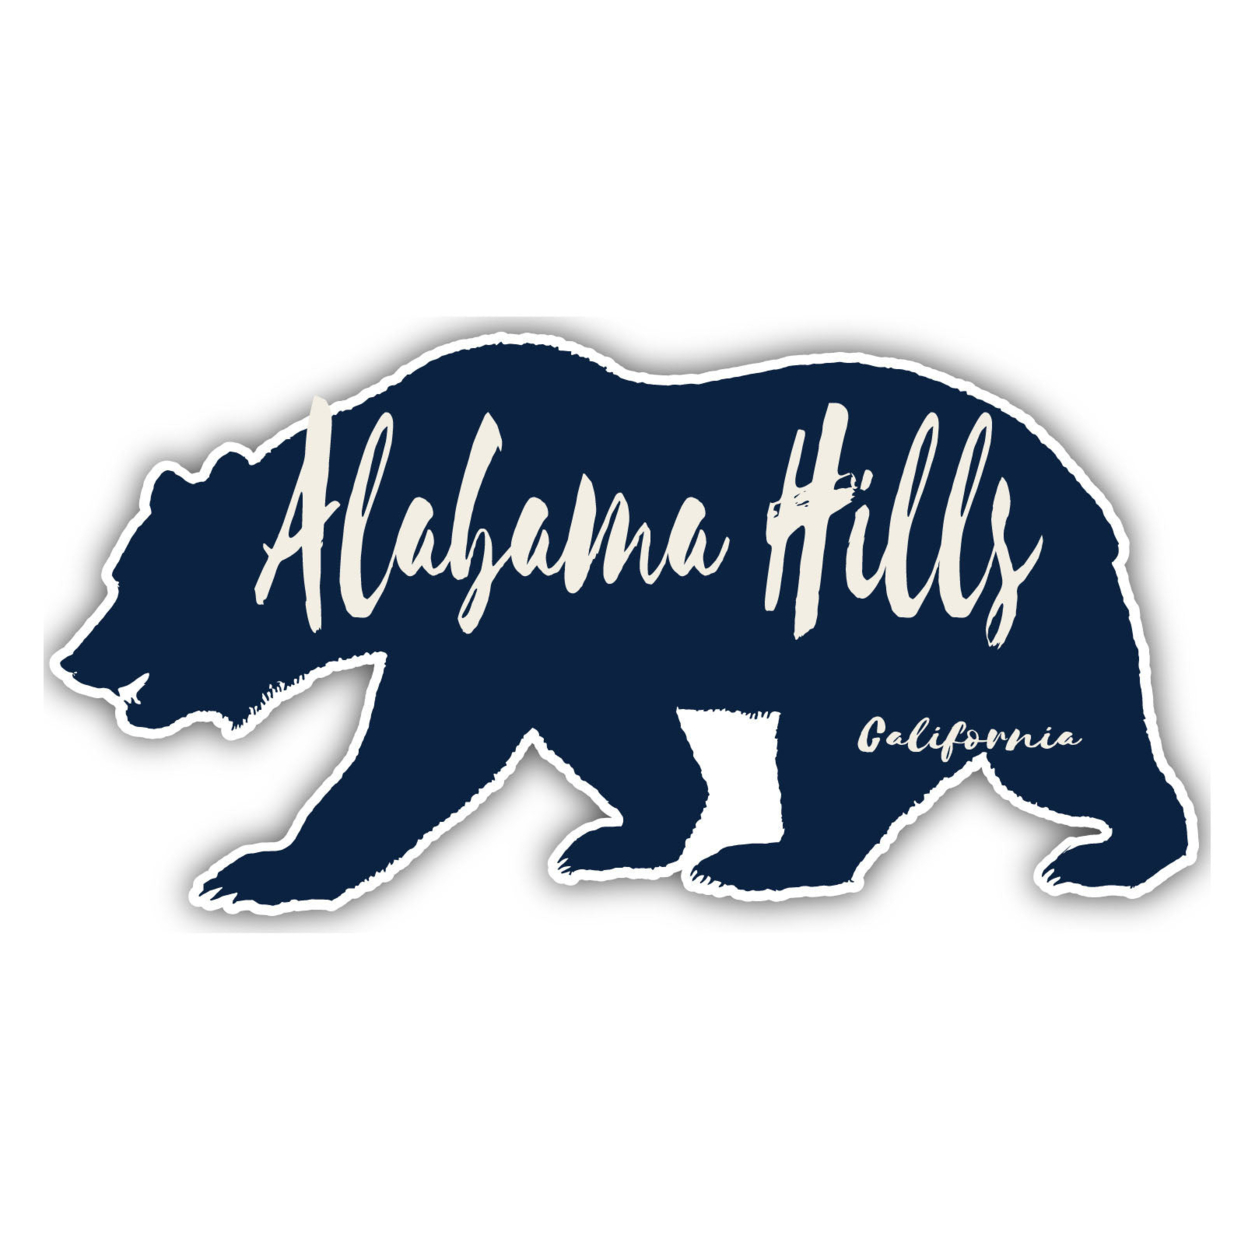 Alabama Hills California Souvenir Decorative Stickers (Choose Theme And Size) - Single Unit, 2-Inch, Great Outdoors